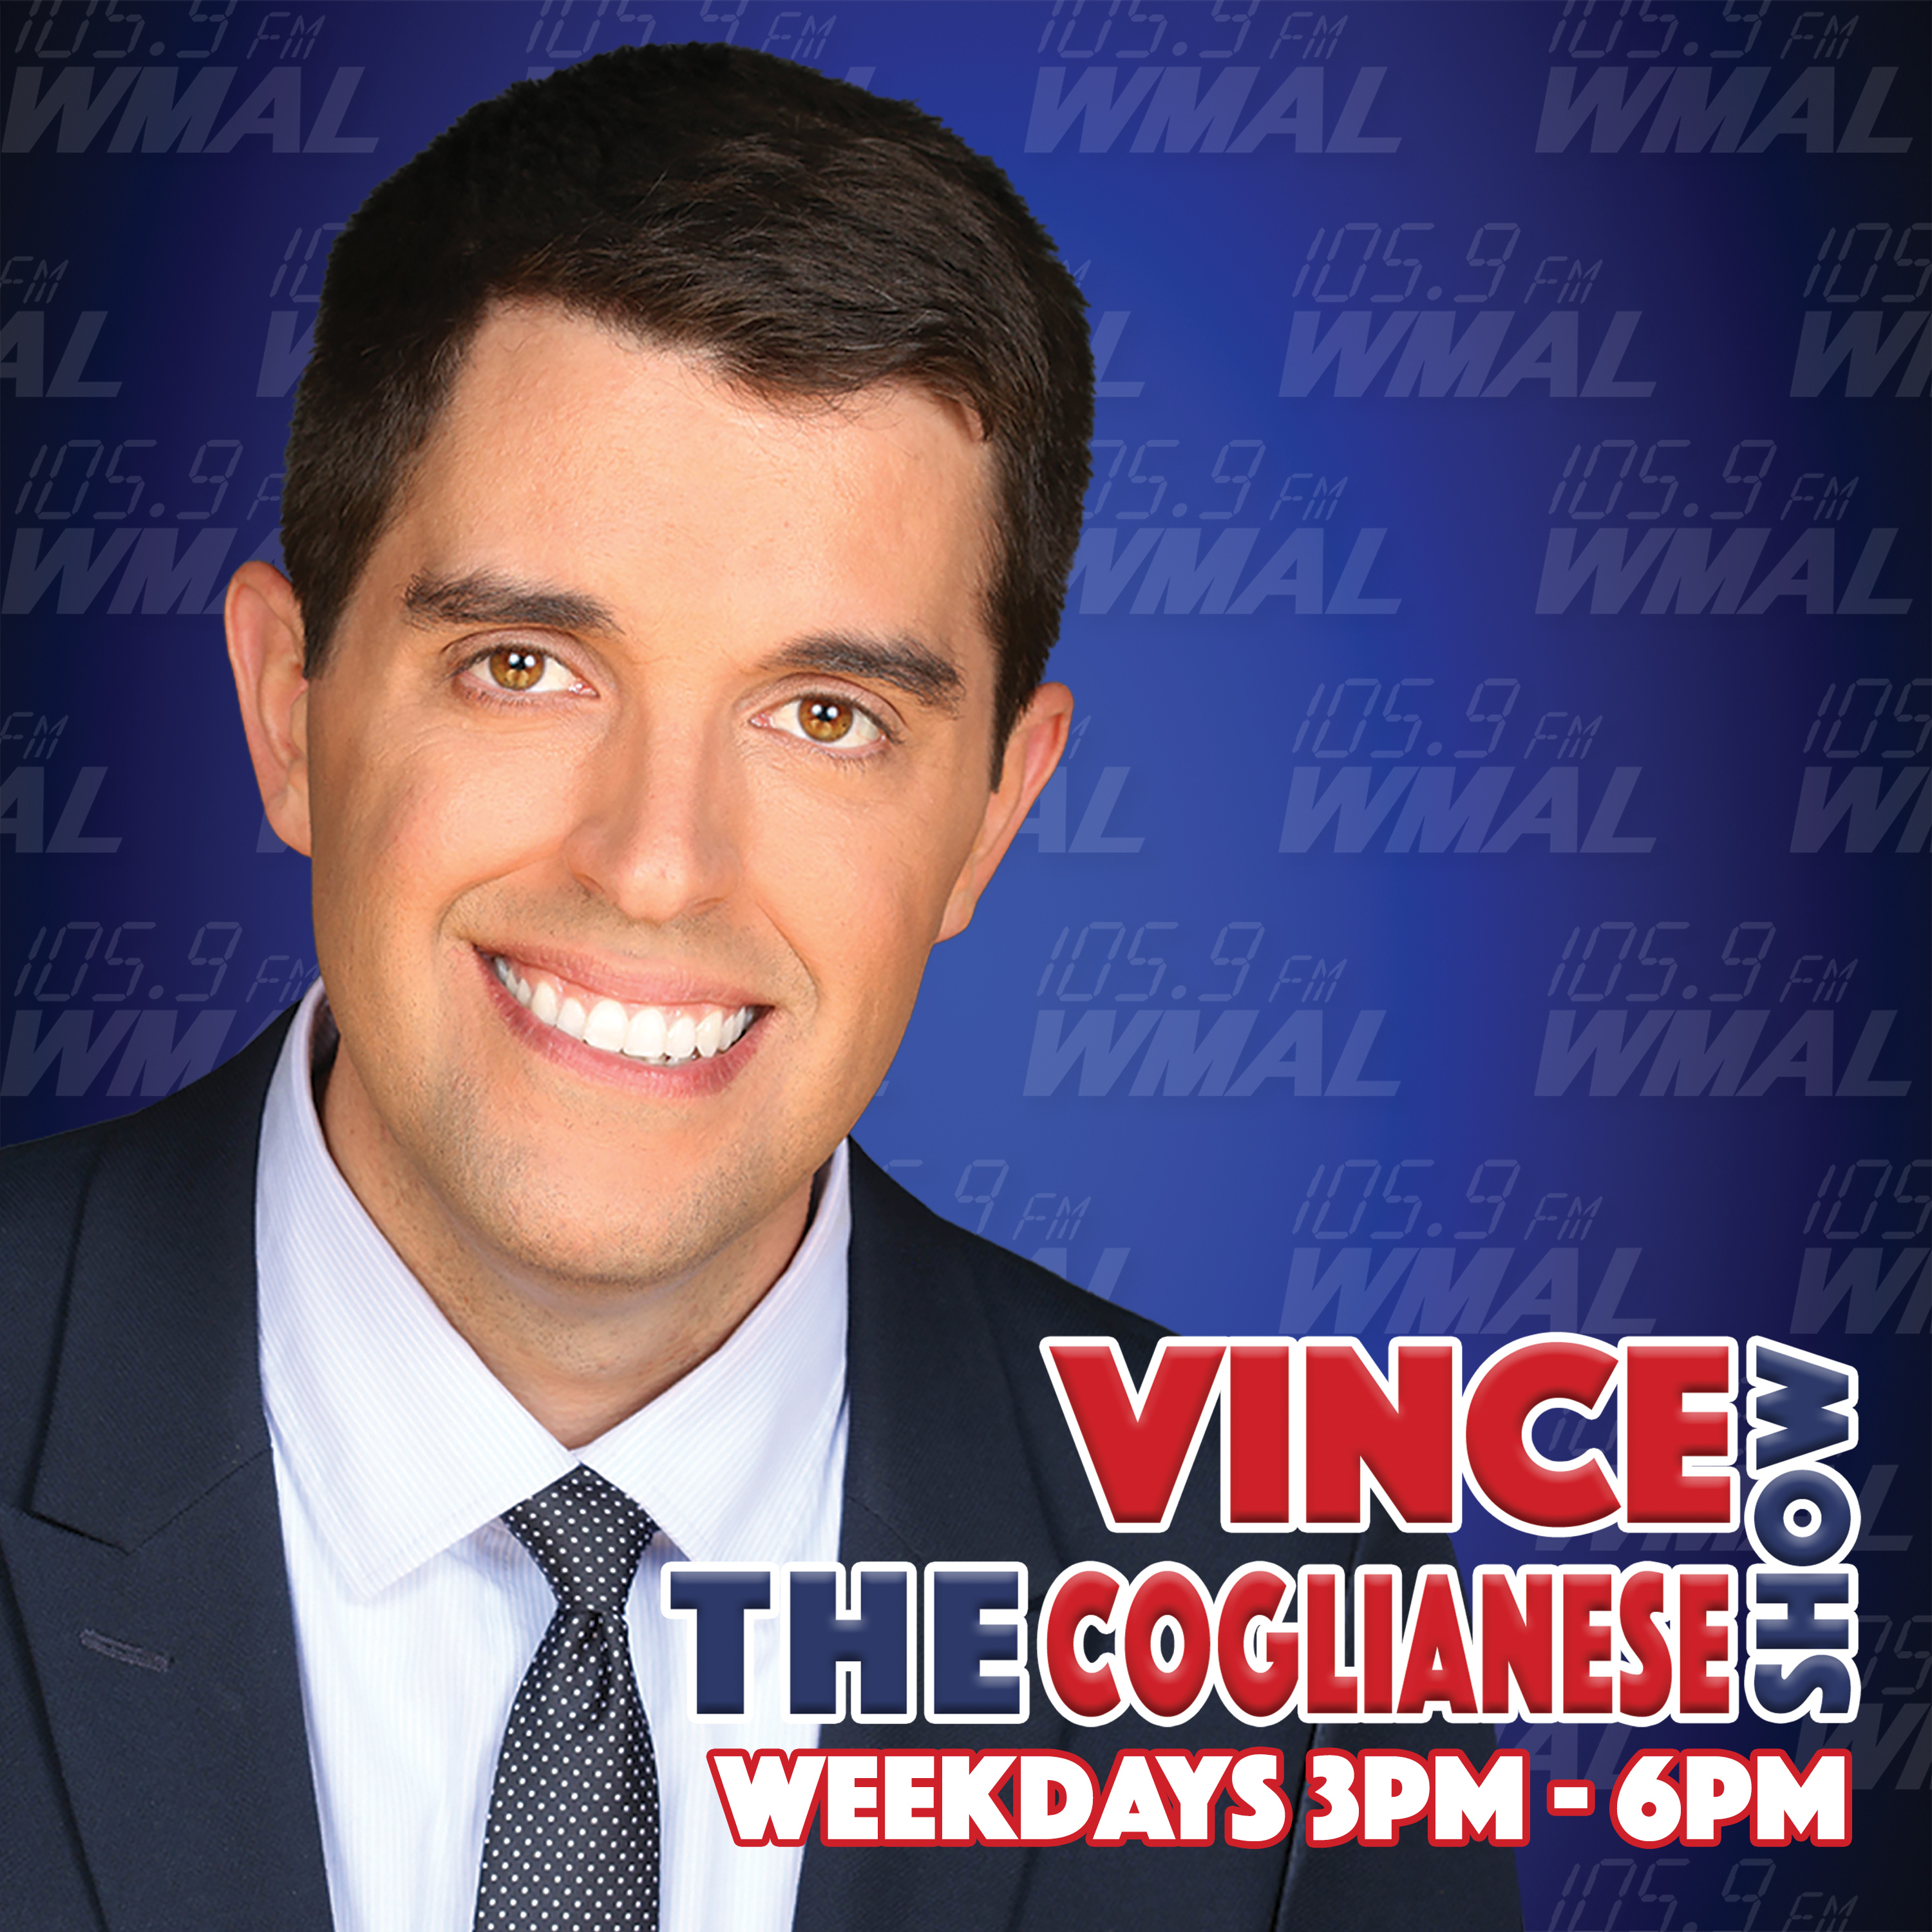 WORTH LISTENING TO: On WMAL’s Vince Coglianese Show: Discussing a wide range of crime and gun control issues